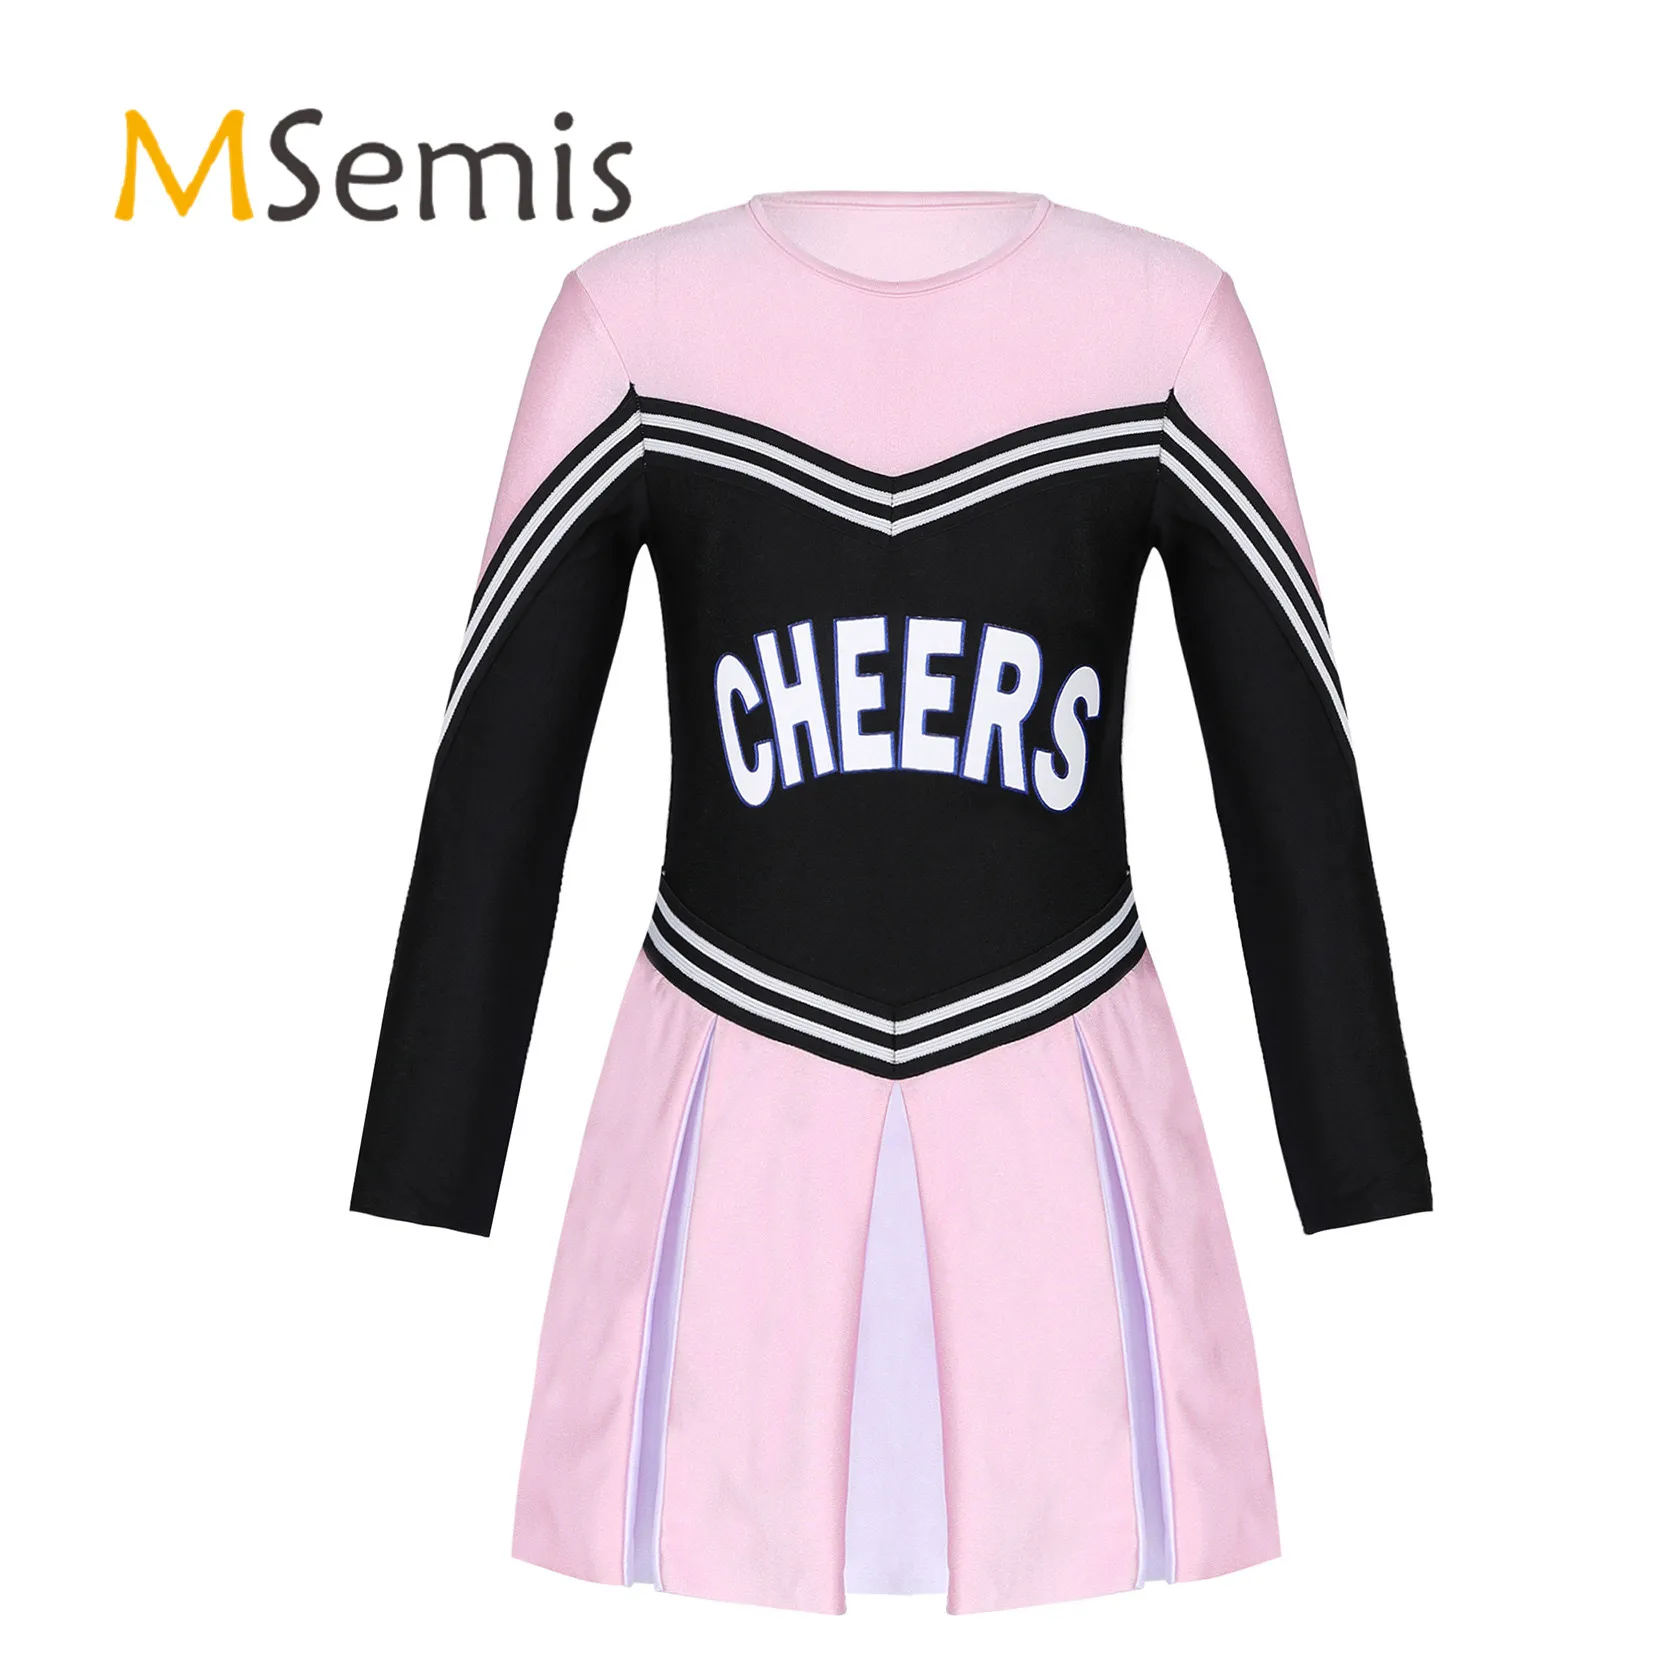 

Kids Girls Cheerleading Dance Uniform Long Sleeve Cheers Printed Pleated Dress with Press Buttons at Crotch Cheerleader Dress